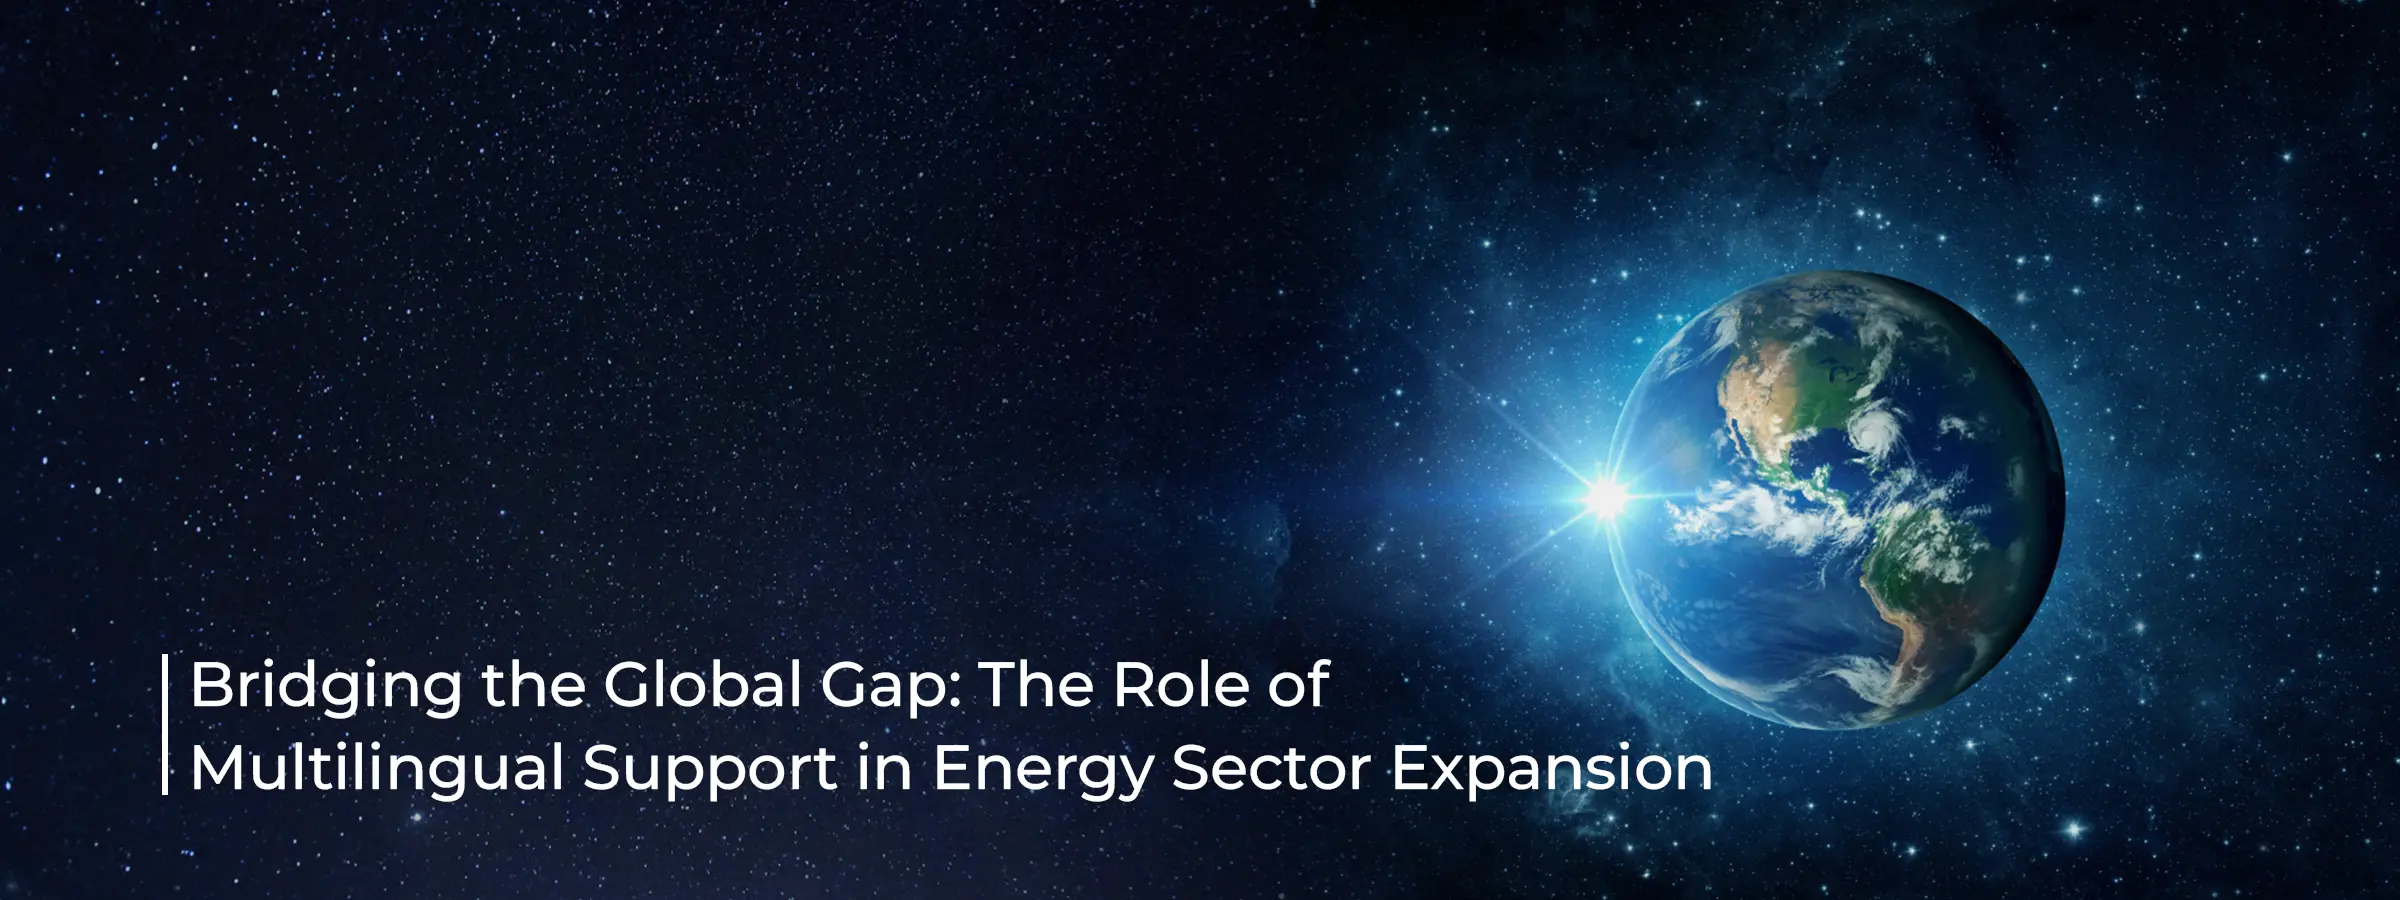 bridging-the-global-gap-the-role-of-multilingual-support-in-energy-sector-expansion